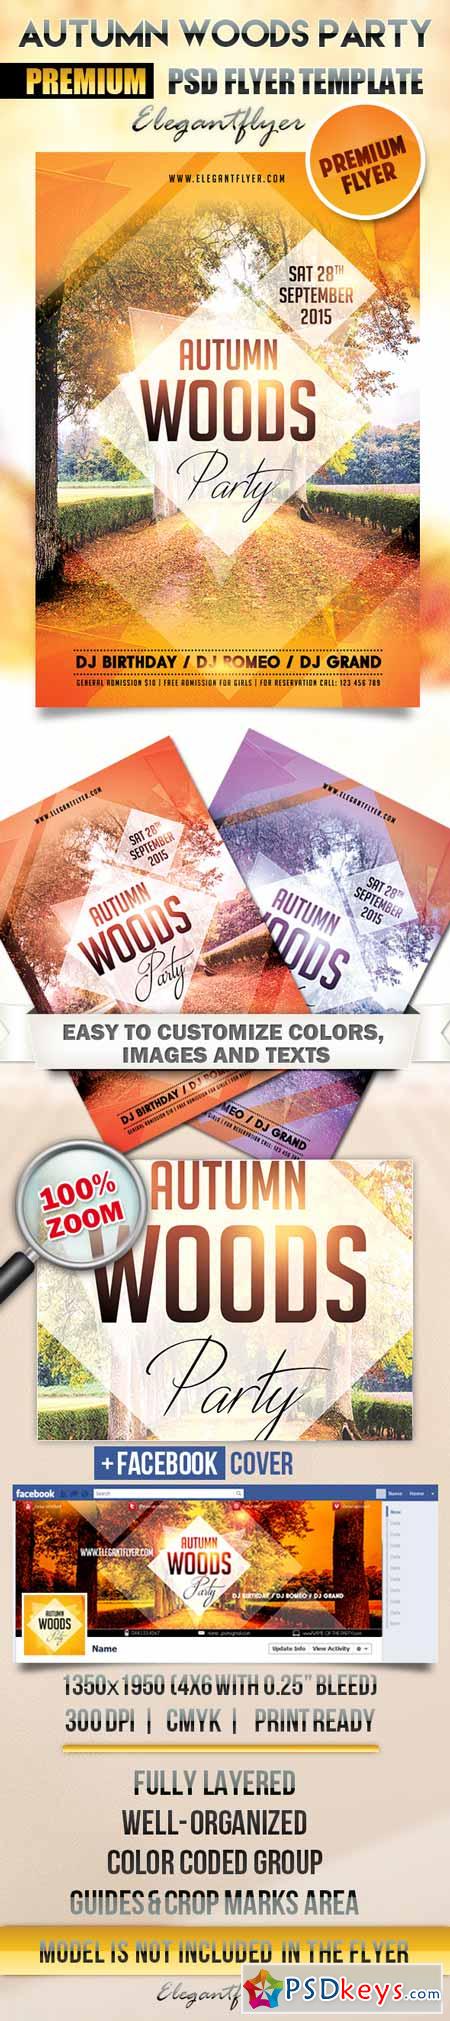 Autumn Woods Party – Flyer PSD Template + Facebook Cover